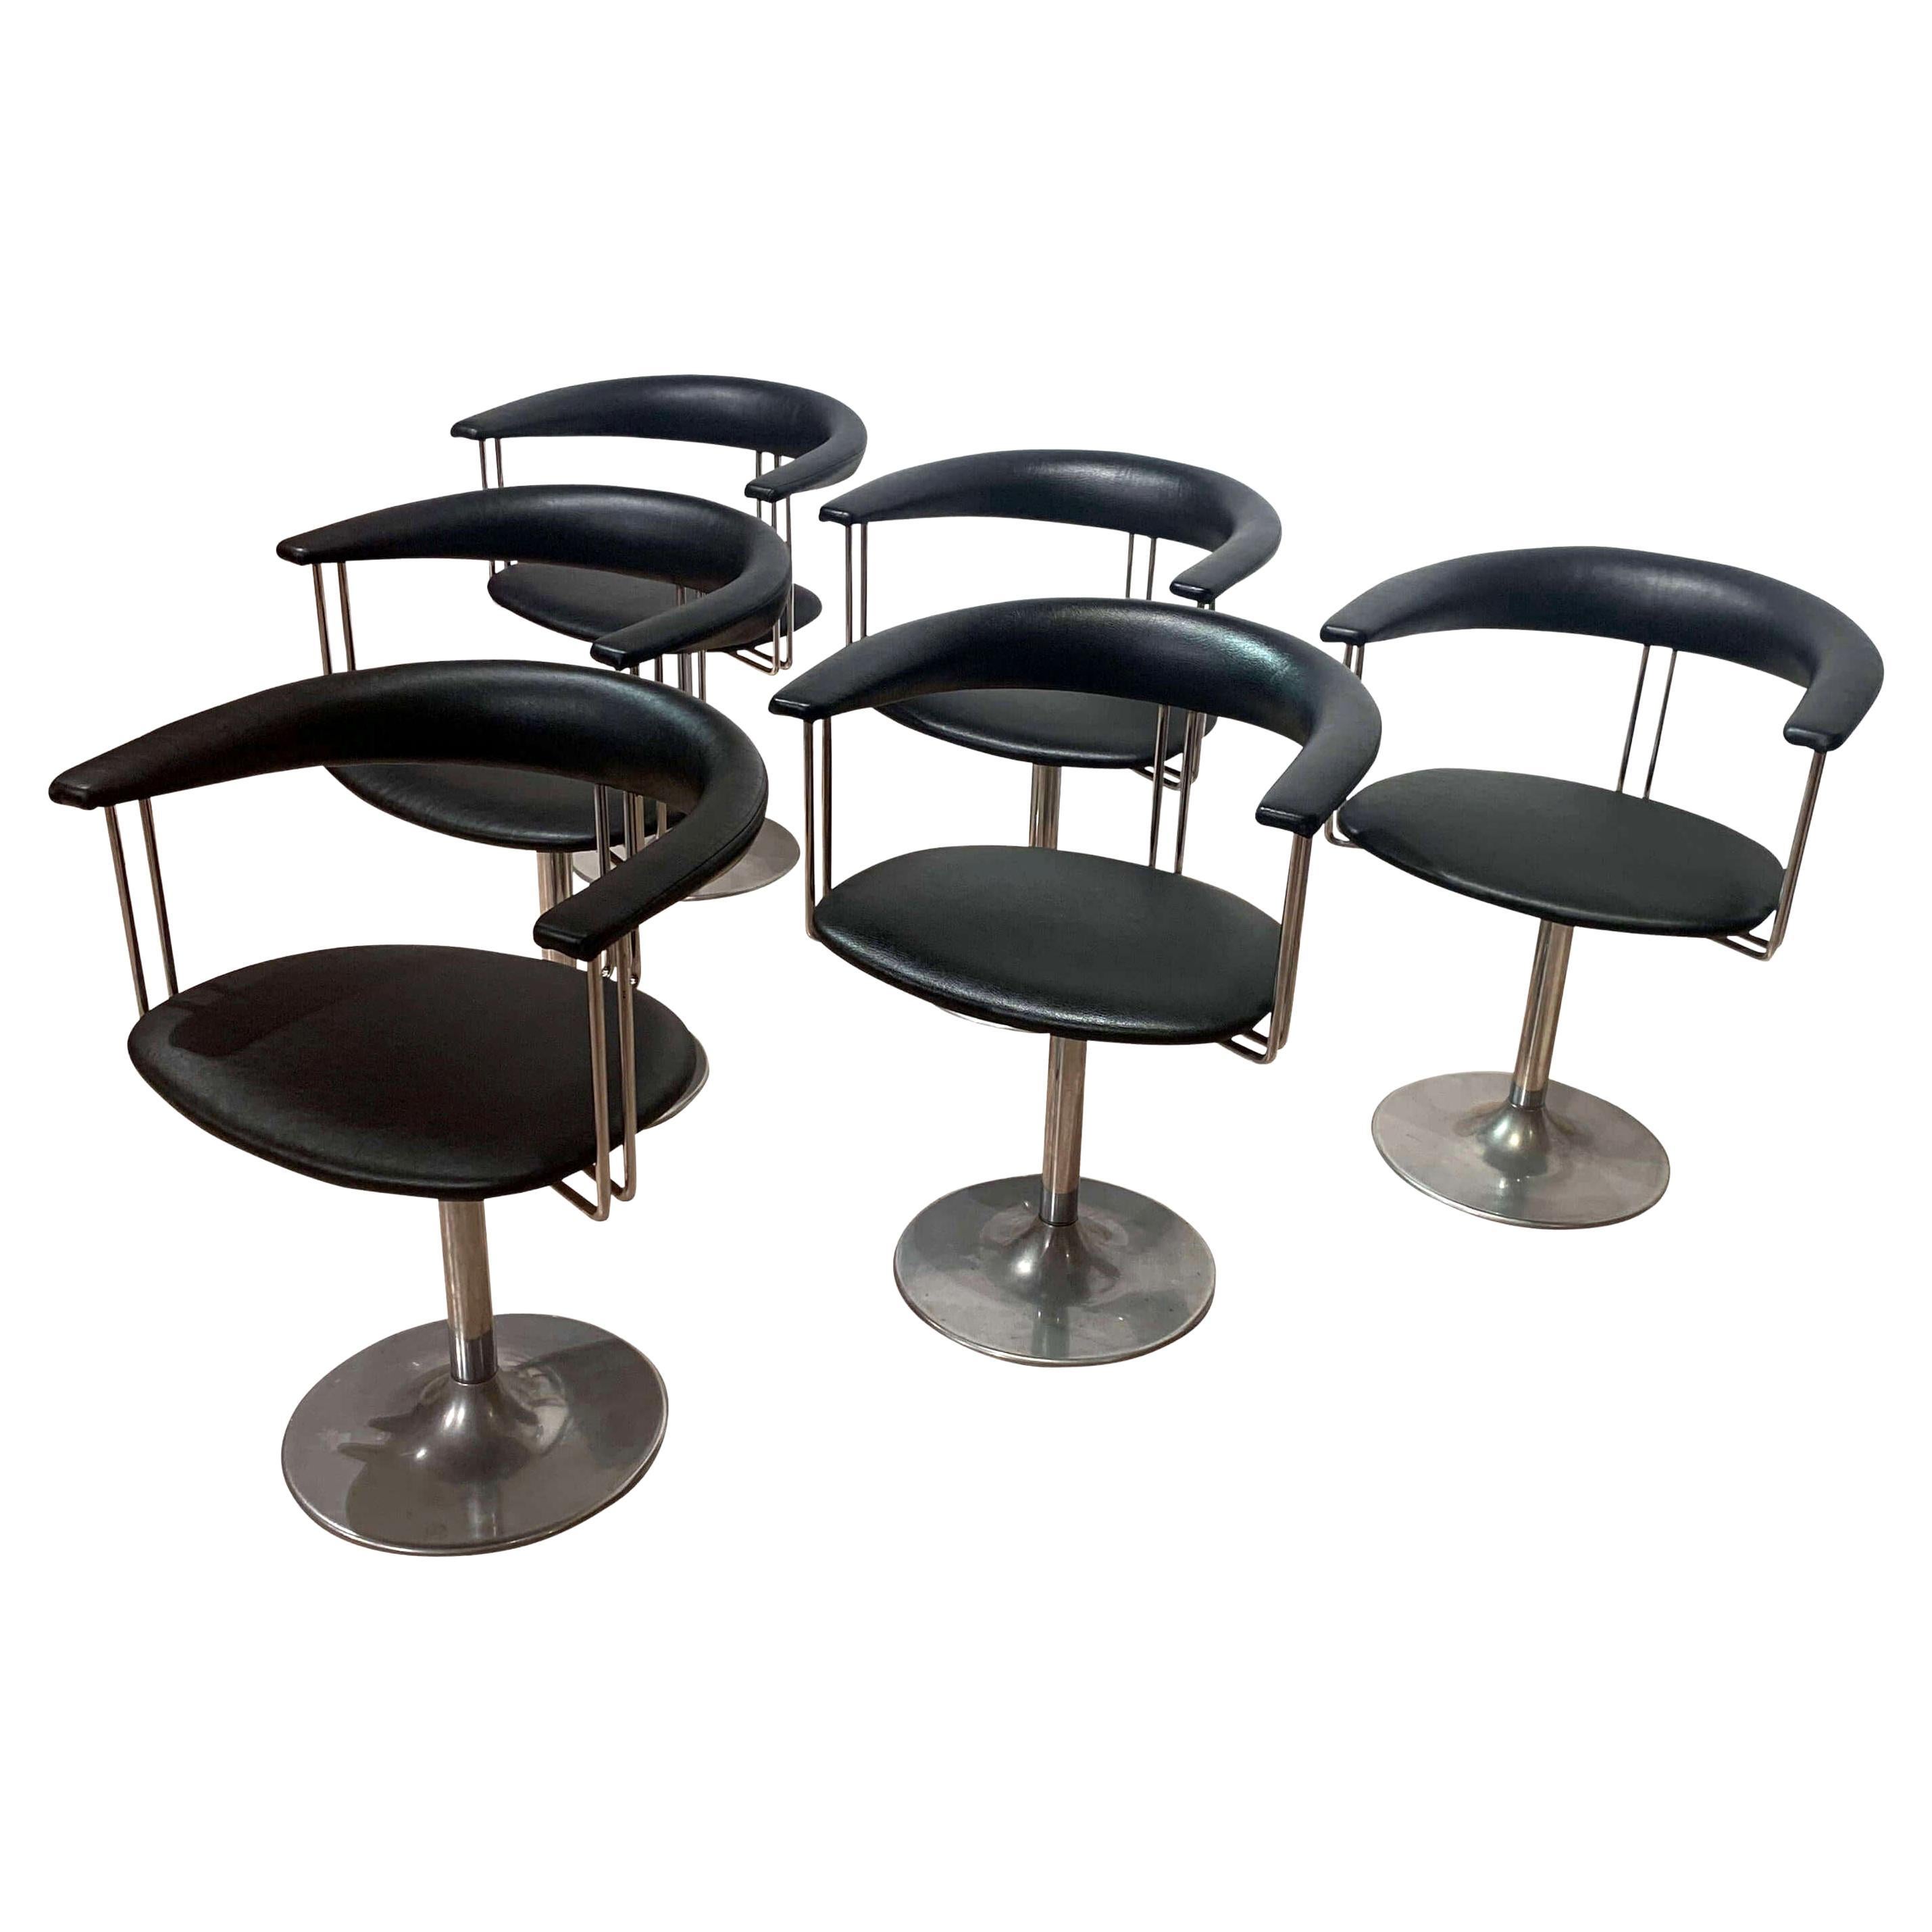 Set of 6 Swivel Armchairs, Black Leather and Metal, Netherlands circa 1970s